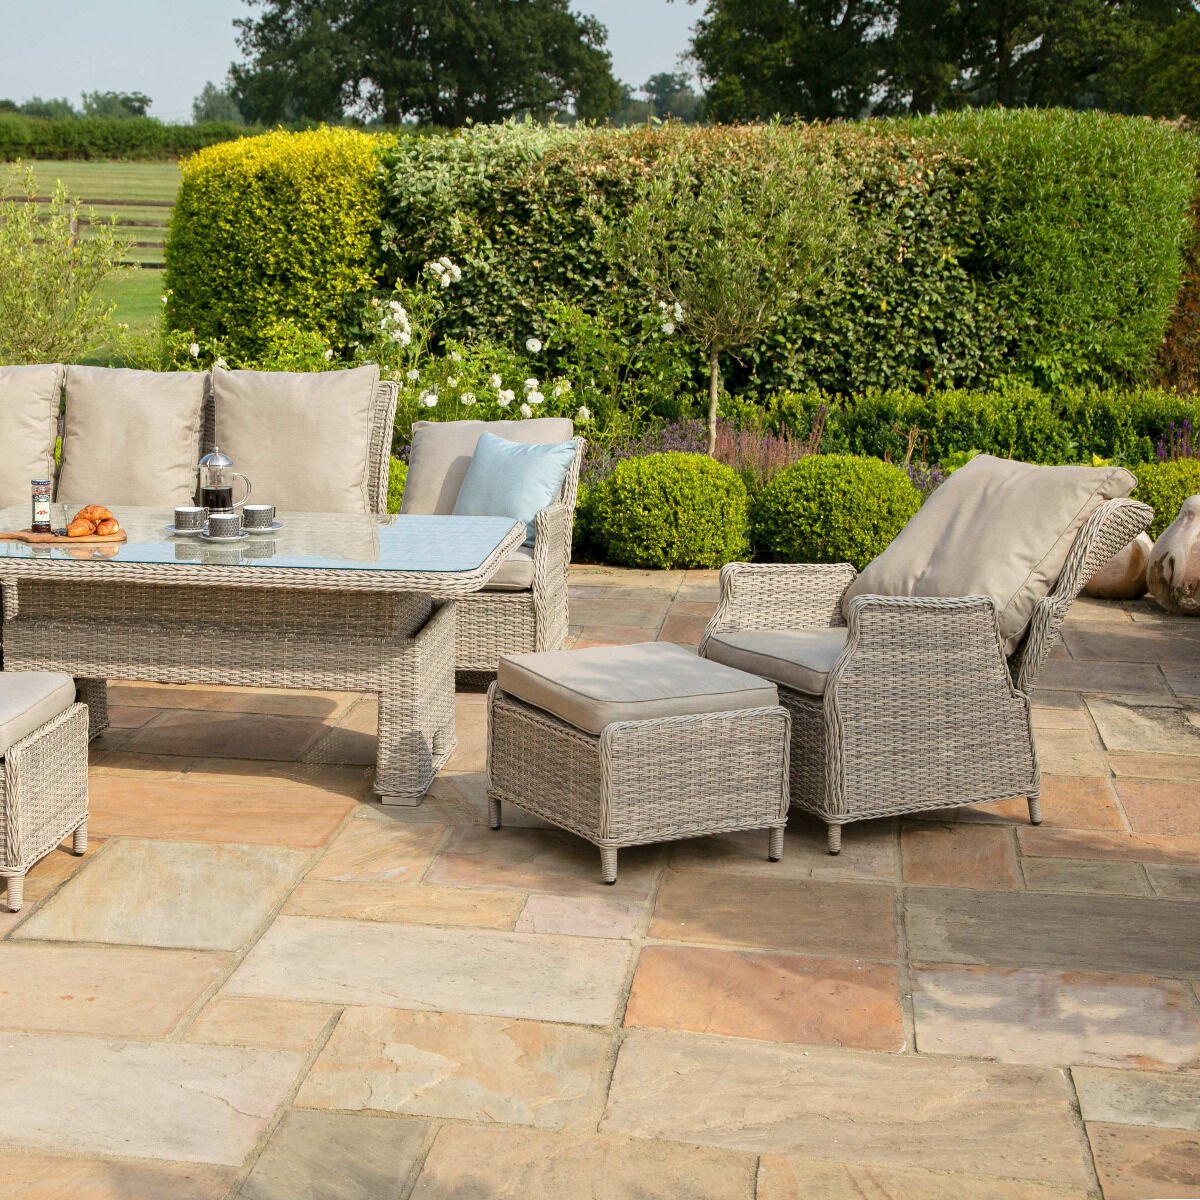 Maze - Cotswold Reclining Rattan Corner Dining Set with Rising Table, 2 Footstools & Armchair product image